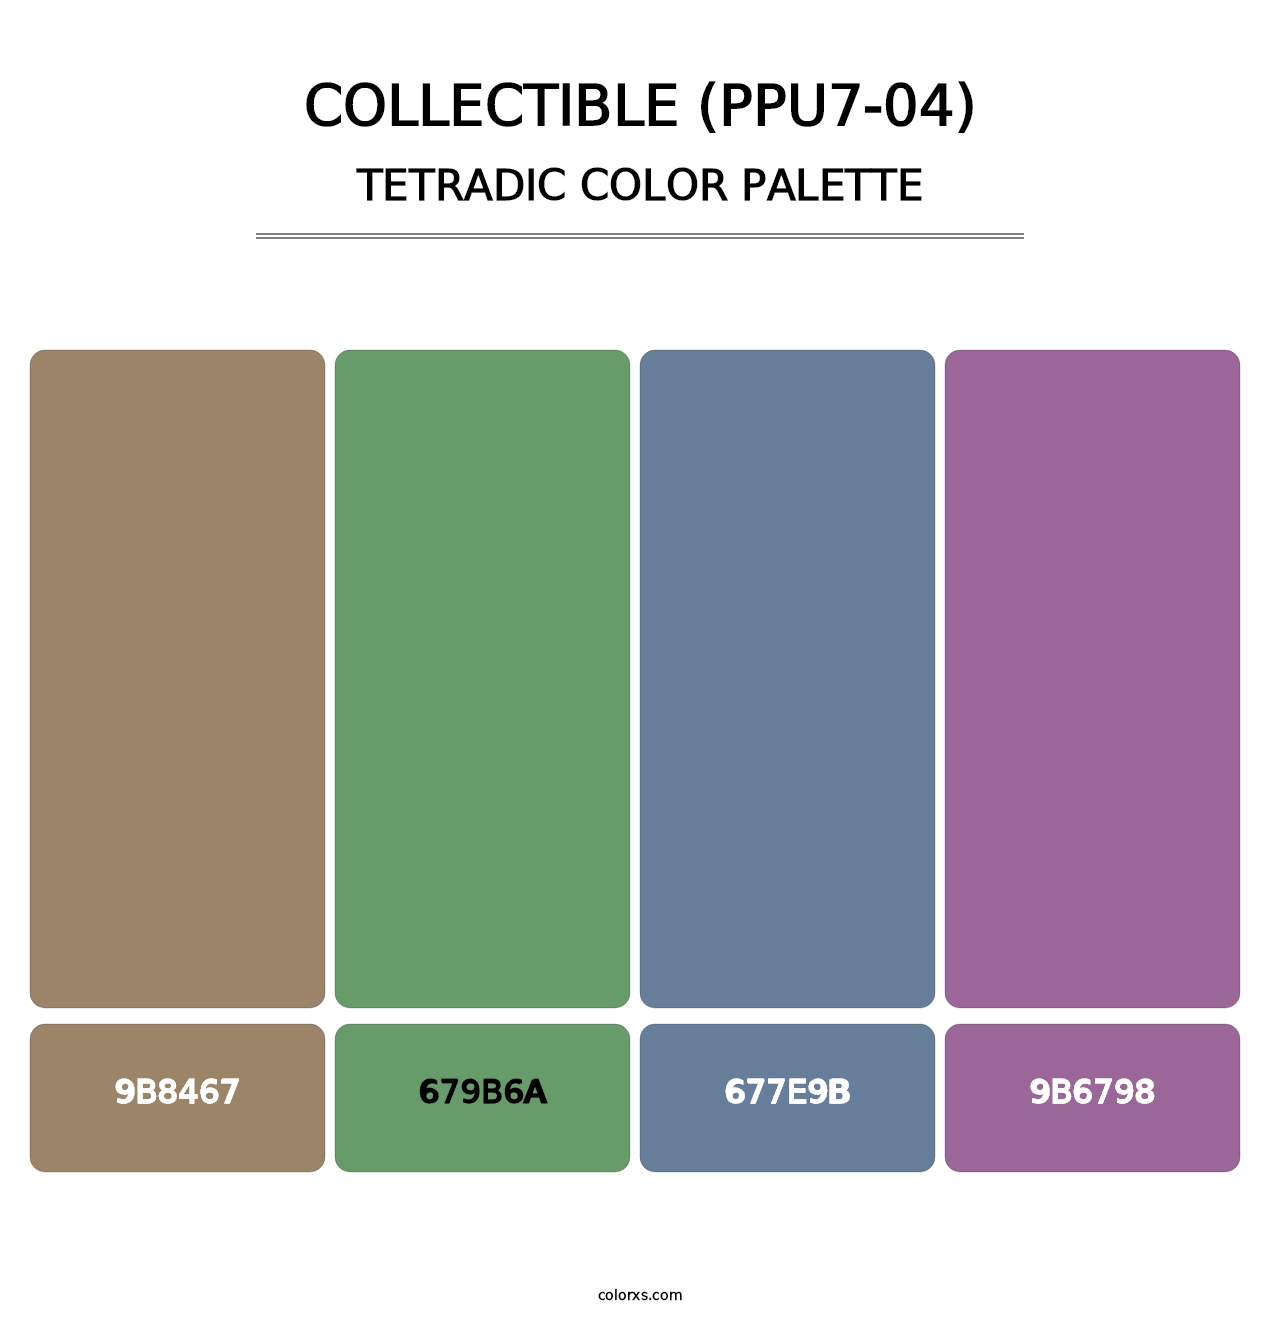 Collectible (PPU7-04) - Tetradic Color Palette